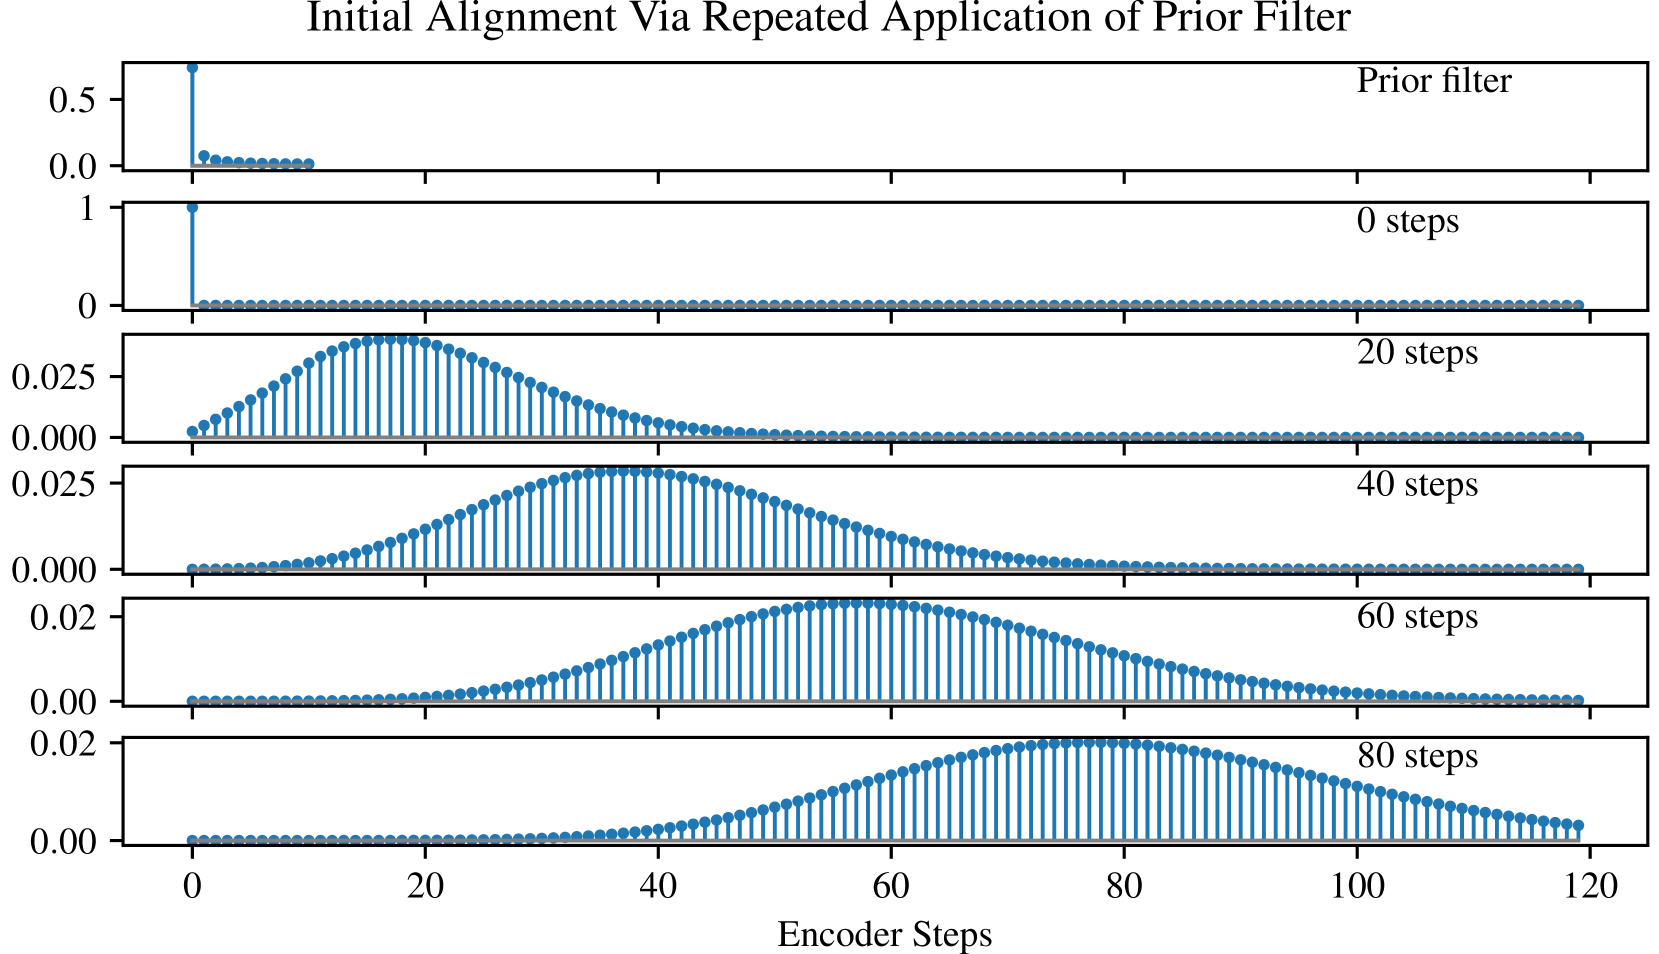 Figure 1: Initial alignment encouraged by the prior filter. (DCA, 2019)